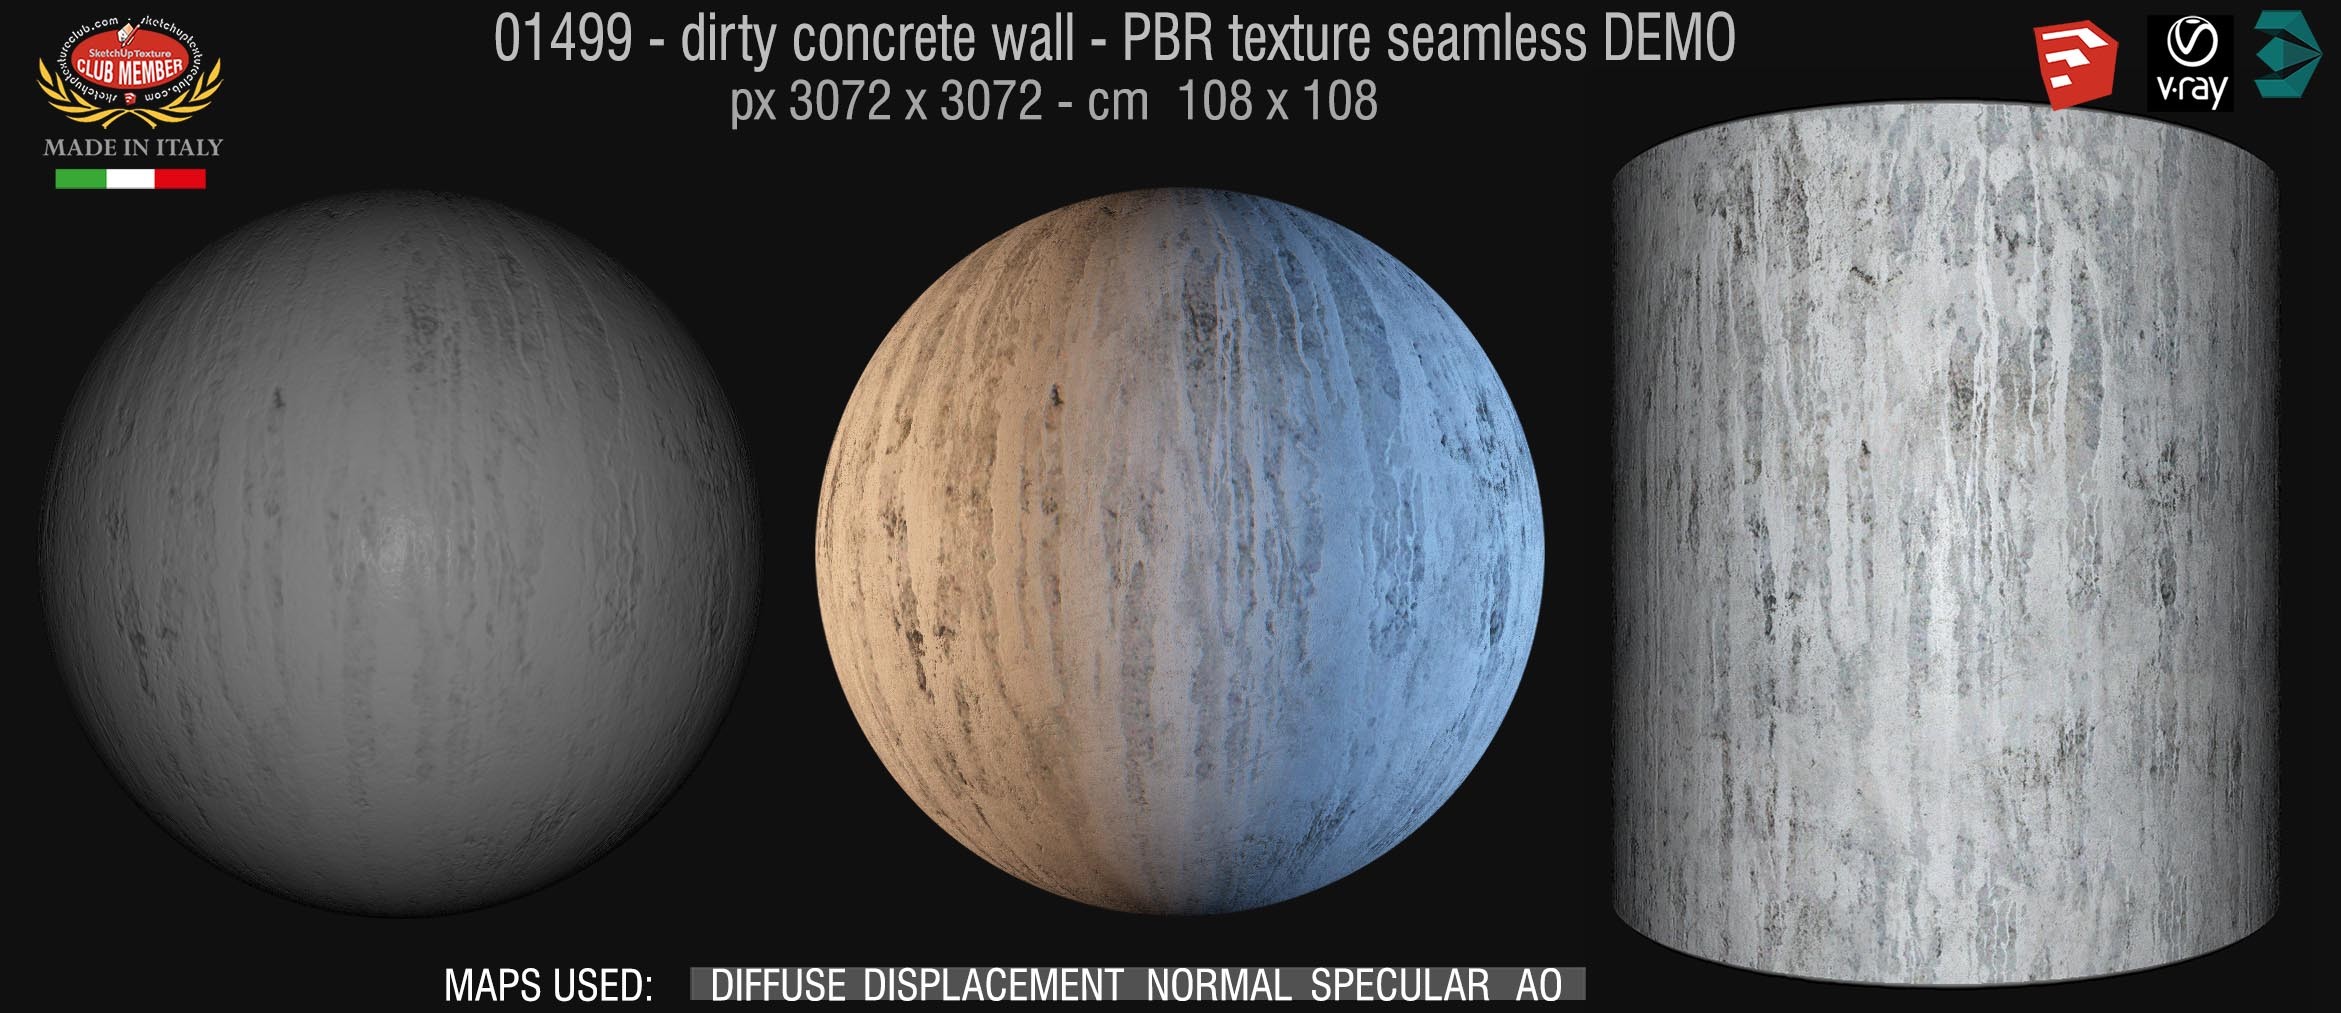 01499 Concrete bare dirty wall PBR texture seamless DEMO